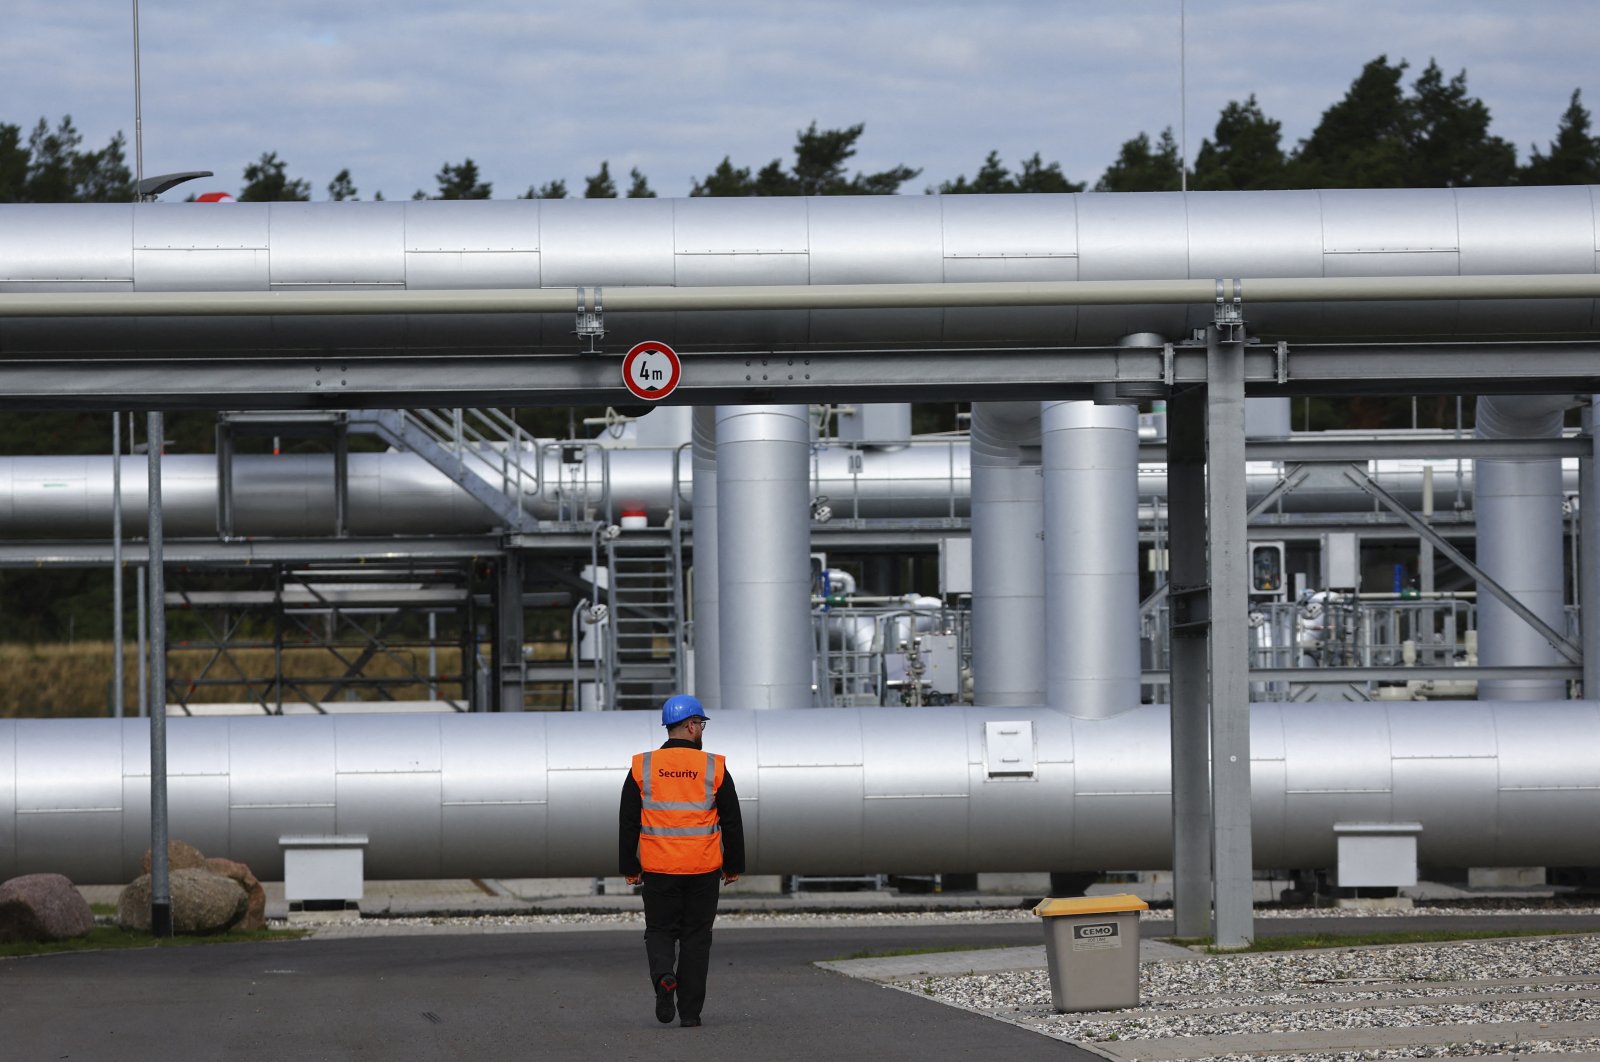 A security guard walks in front of the landfall facility of the Baltic Sea gas pipeline Nord Stream 2 in Lubmin, Germany, Sept. 19, 2022. (Reuters Photo)